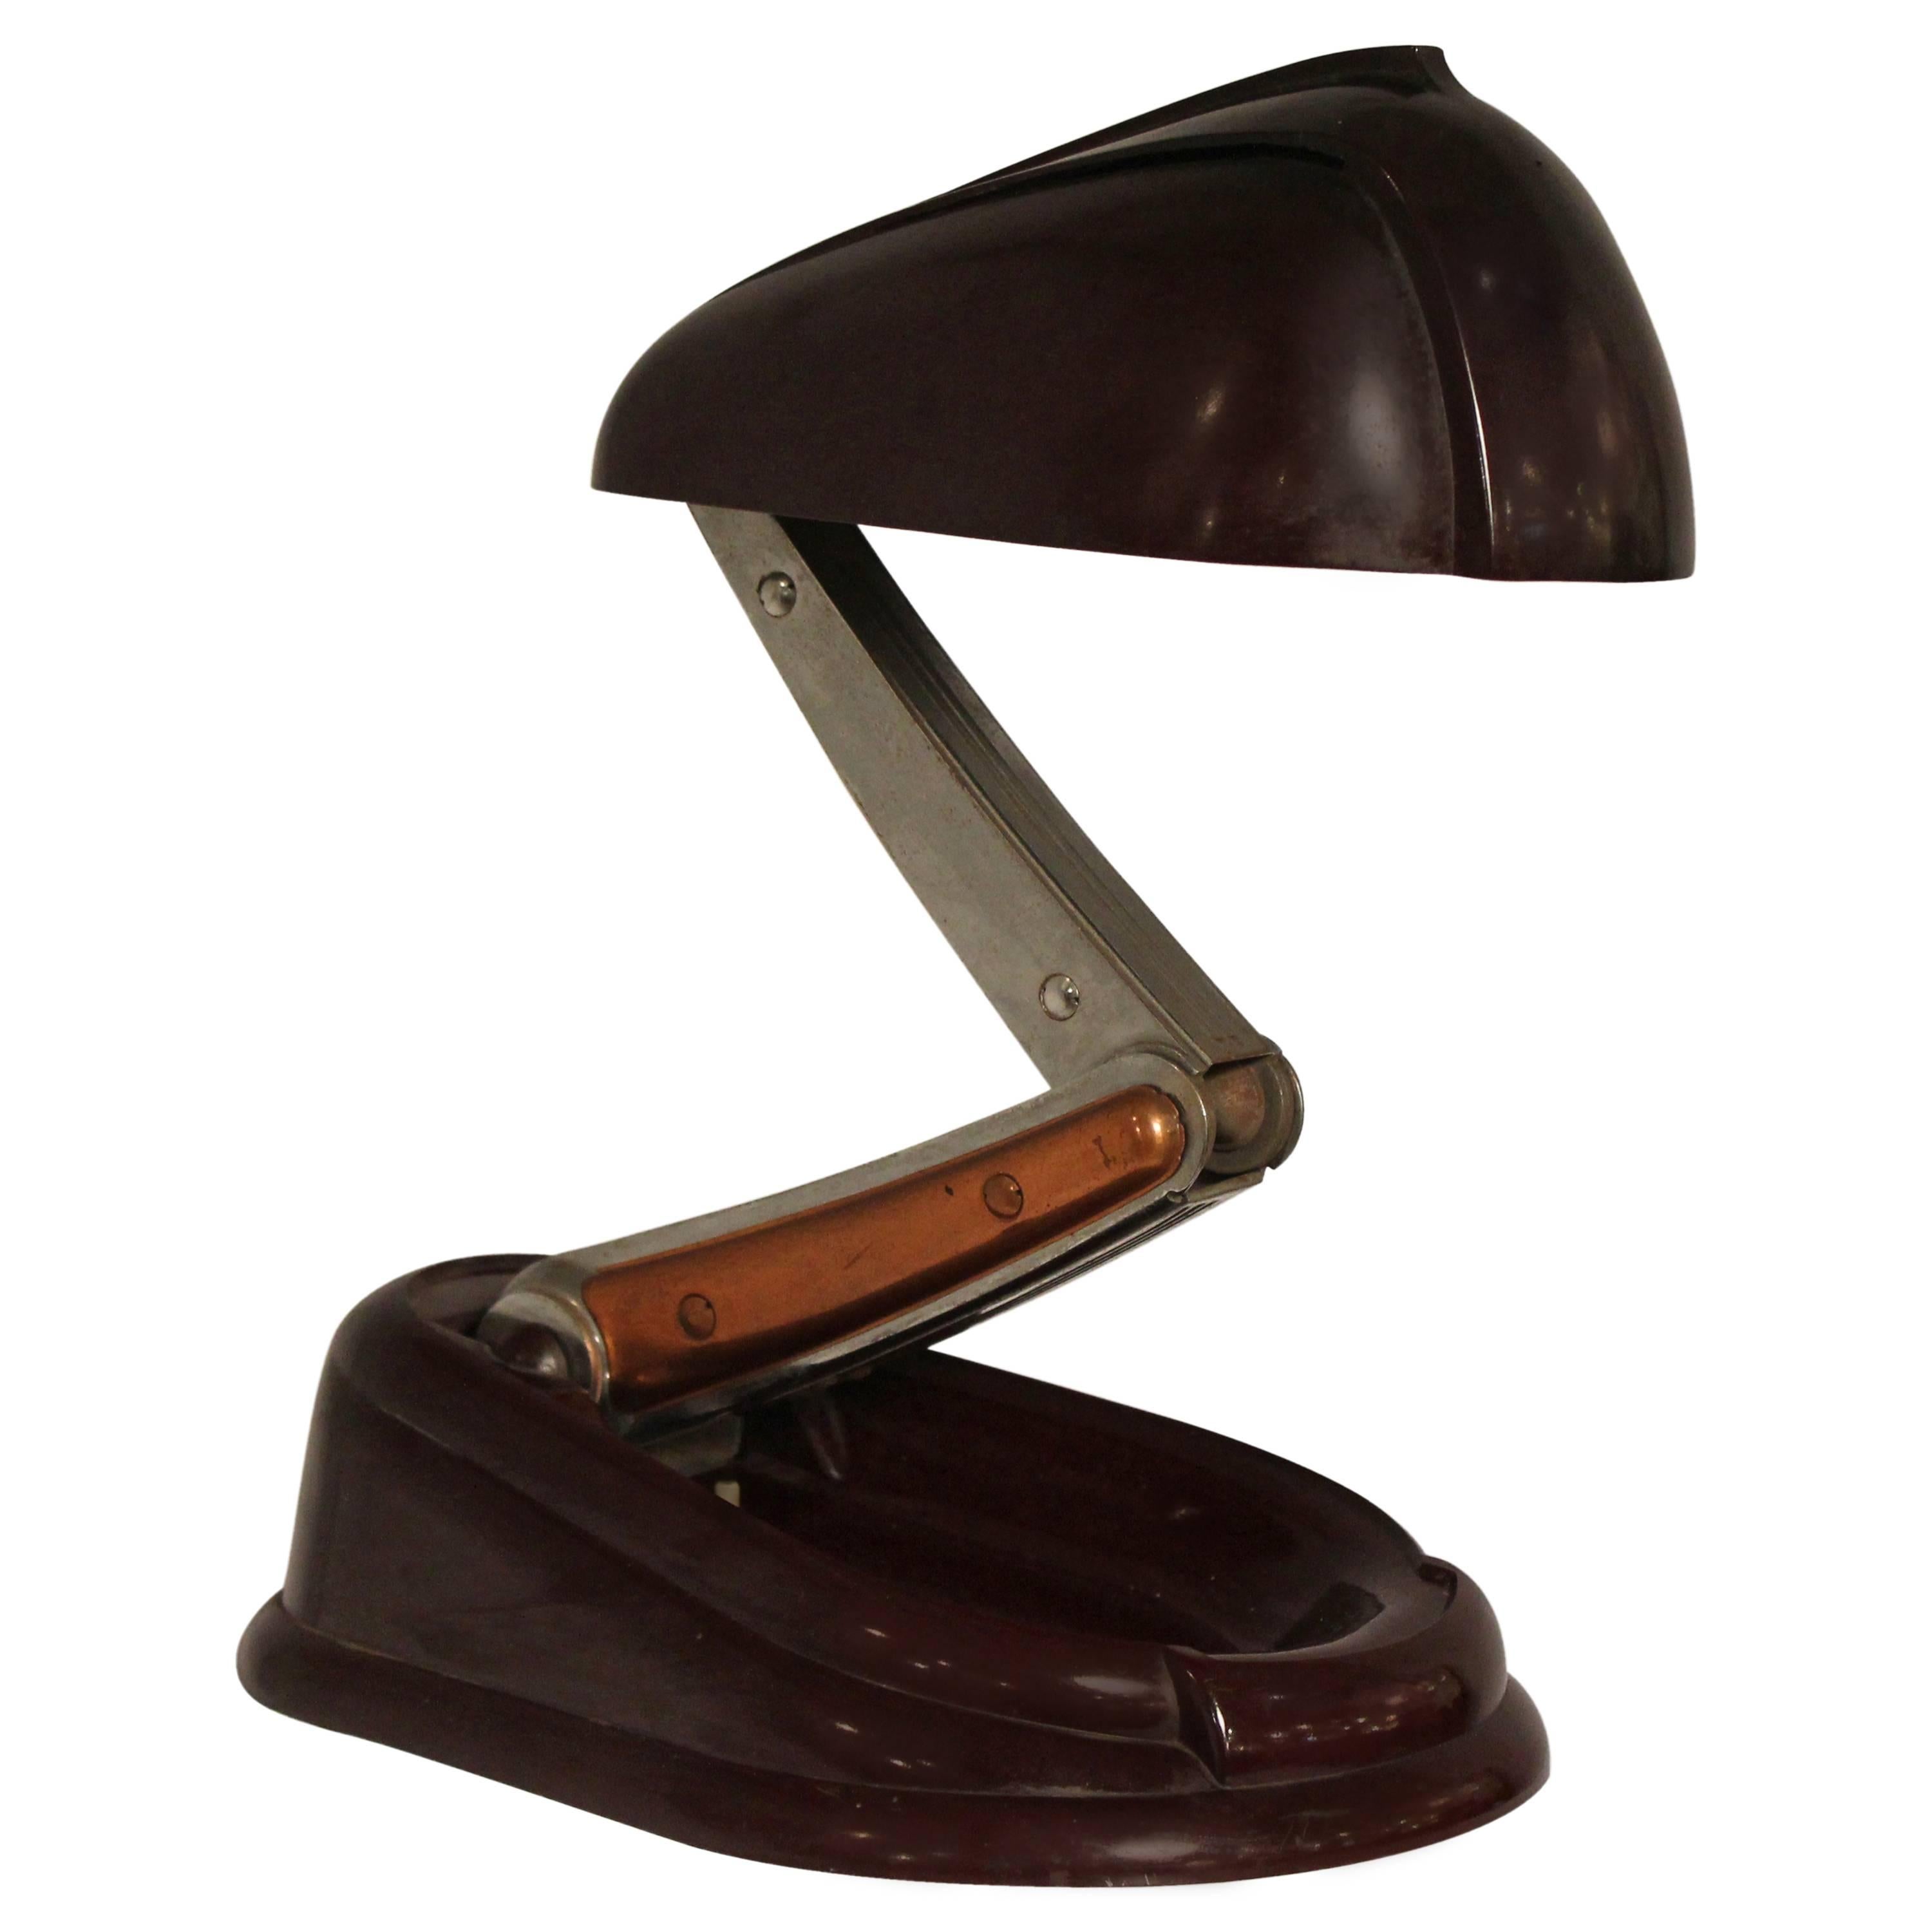 Post War "Bolide" Desk Table Lamp by Gustave Miklos for Jumo, 1945-1950